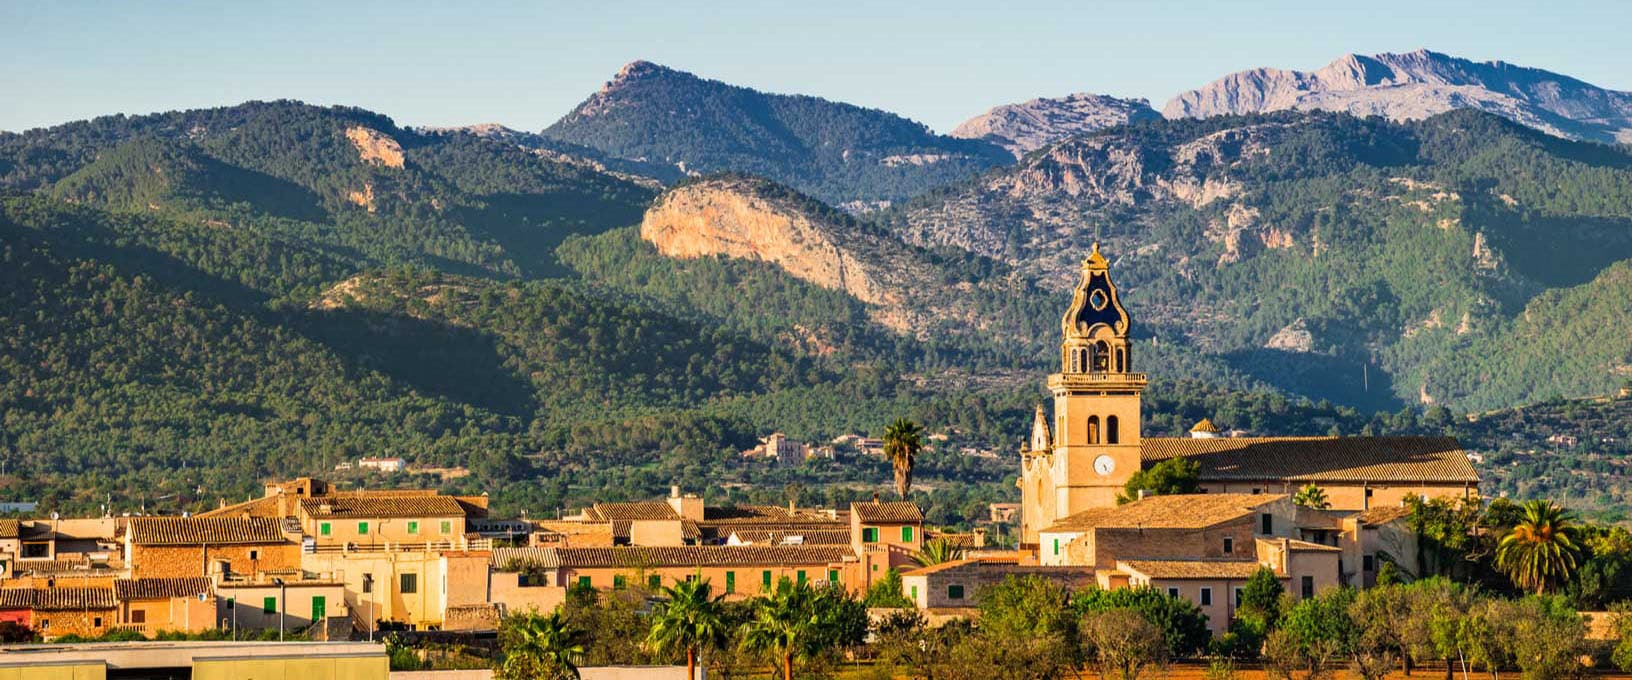 Santa Maria del Cami: a life surrounded by the greenery of the Tramuntana